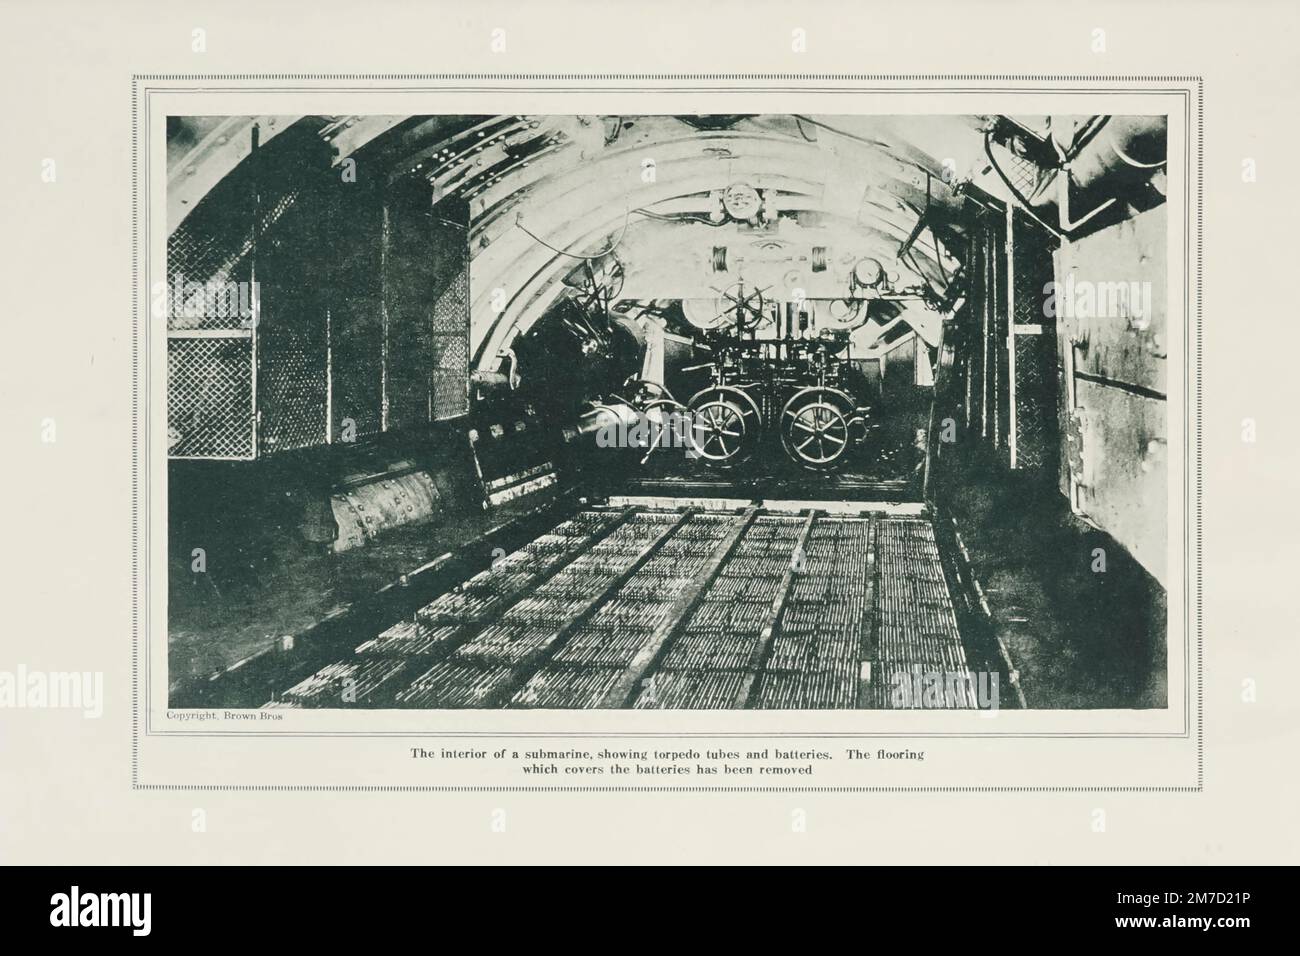 Interior of a Submarine from the book The story of the great war; the complete historical records of events to date DIPLOMATIC AND STATE PAPERS by Reynolds, Francis Joseph, 1867-1937; Churchill, Allen Leon; Miller, Francis Trevelyan, 1877-1959; Wood, Leonard, 1860-1927; Knight, Austin Melvin, 1854-1927; Palmer, Frederick, 1873-1958; Simonds, Frank Herbert, 1878-; Ruhl, Arthur Brown, 1876-  Volume III Published 1916 Stock Photo